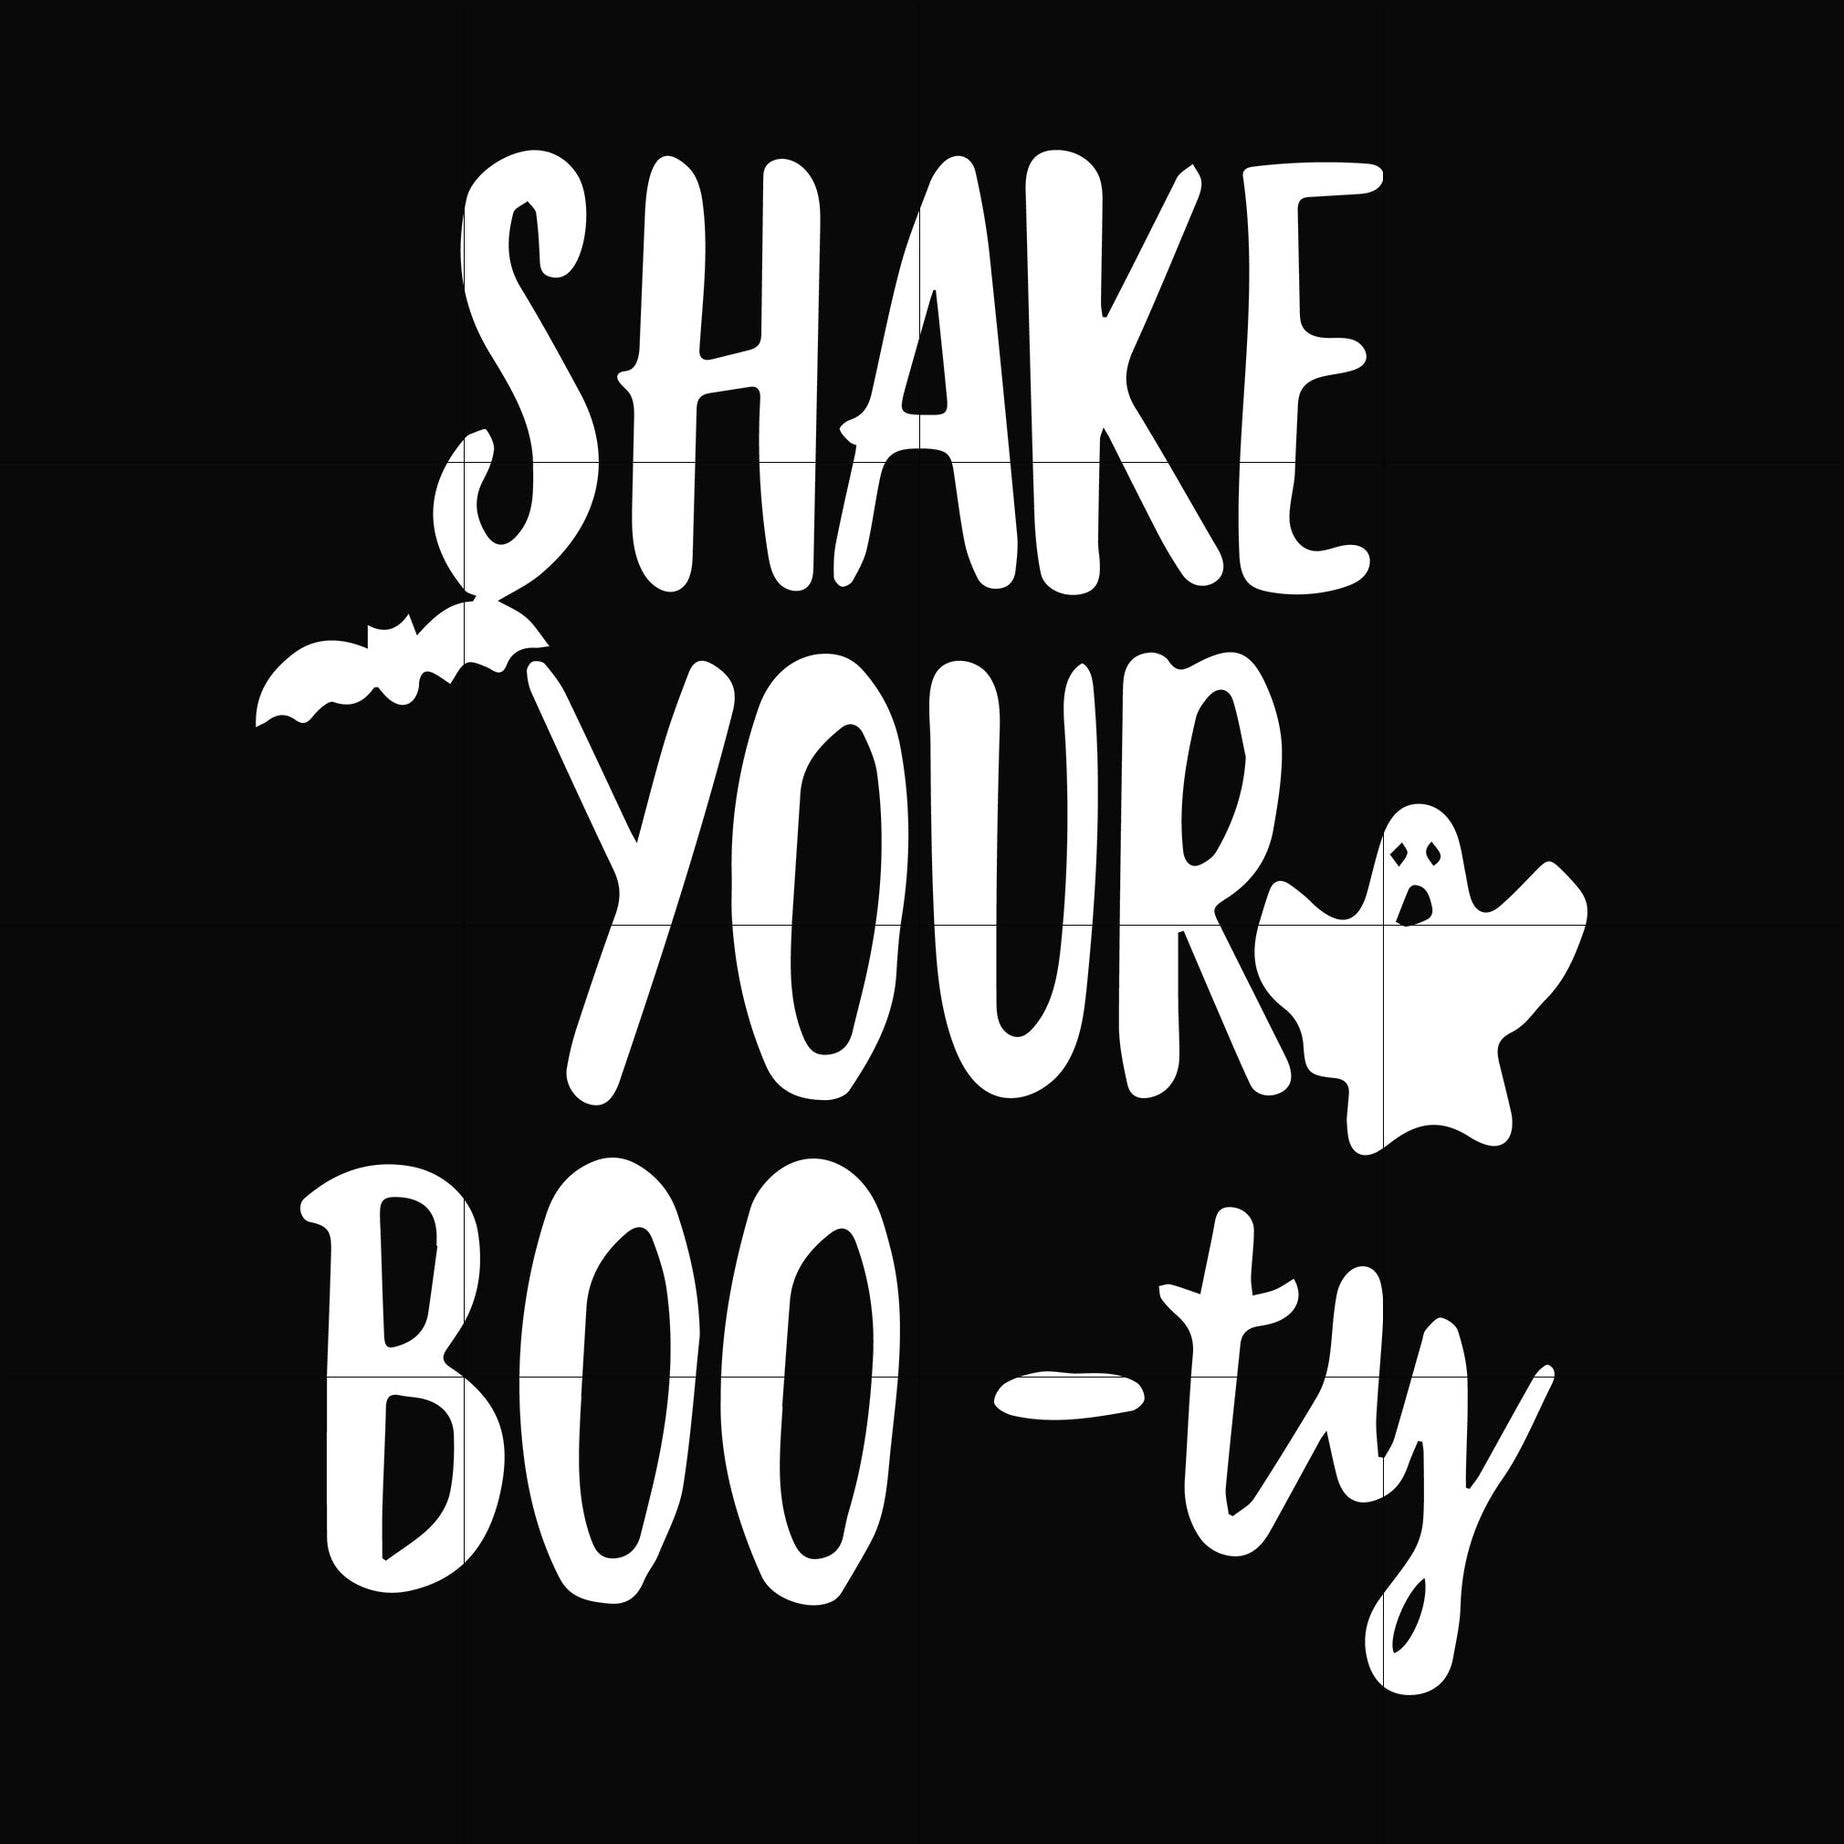 Shake your boo-ty svg, halloween svg png, dxf, eps digital file HWL17072037